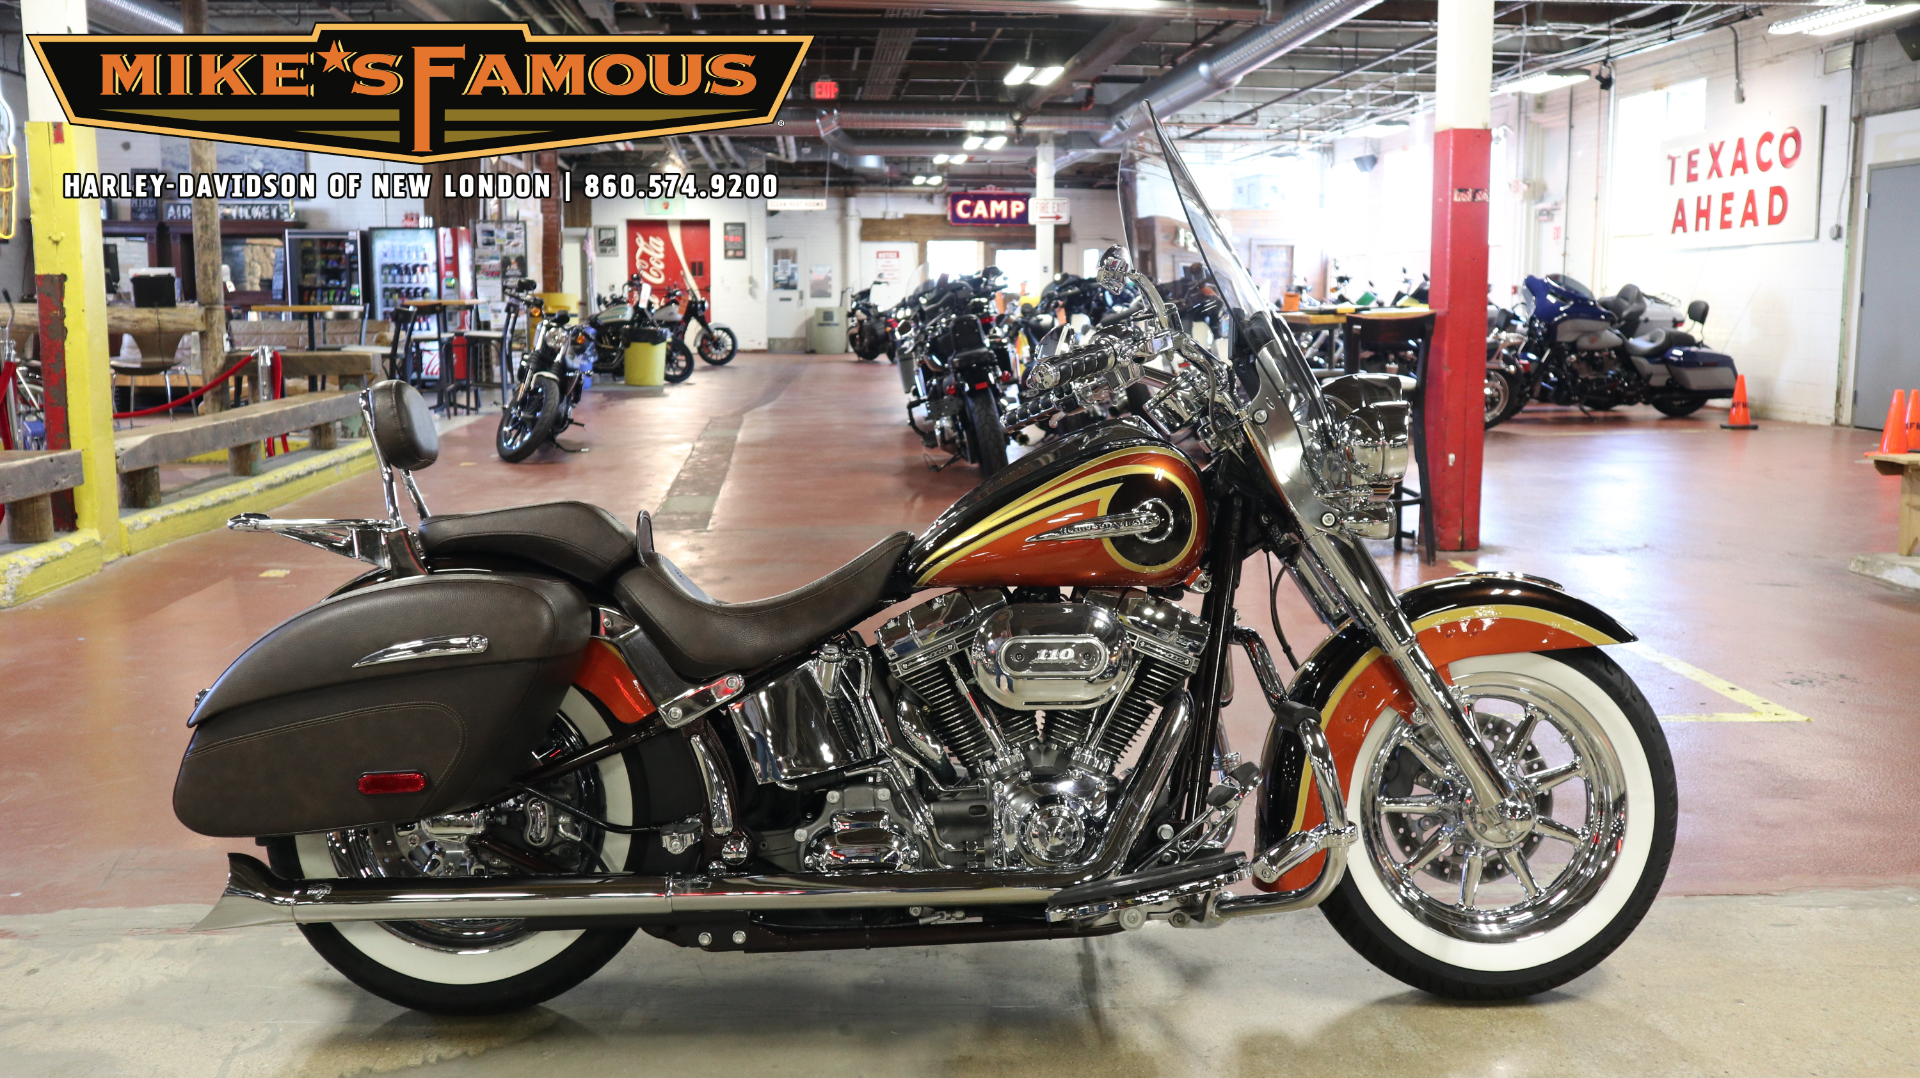 2014 Harley-Davidson CVO™ Softail® Deluxe in New London, Connecticut - Photo 1